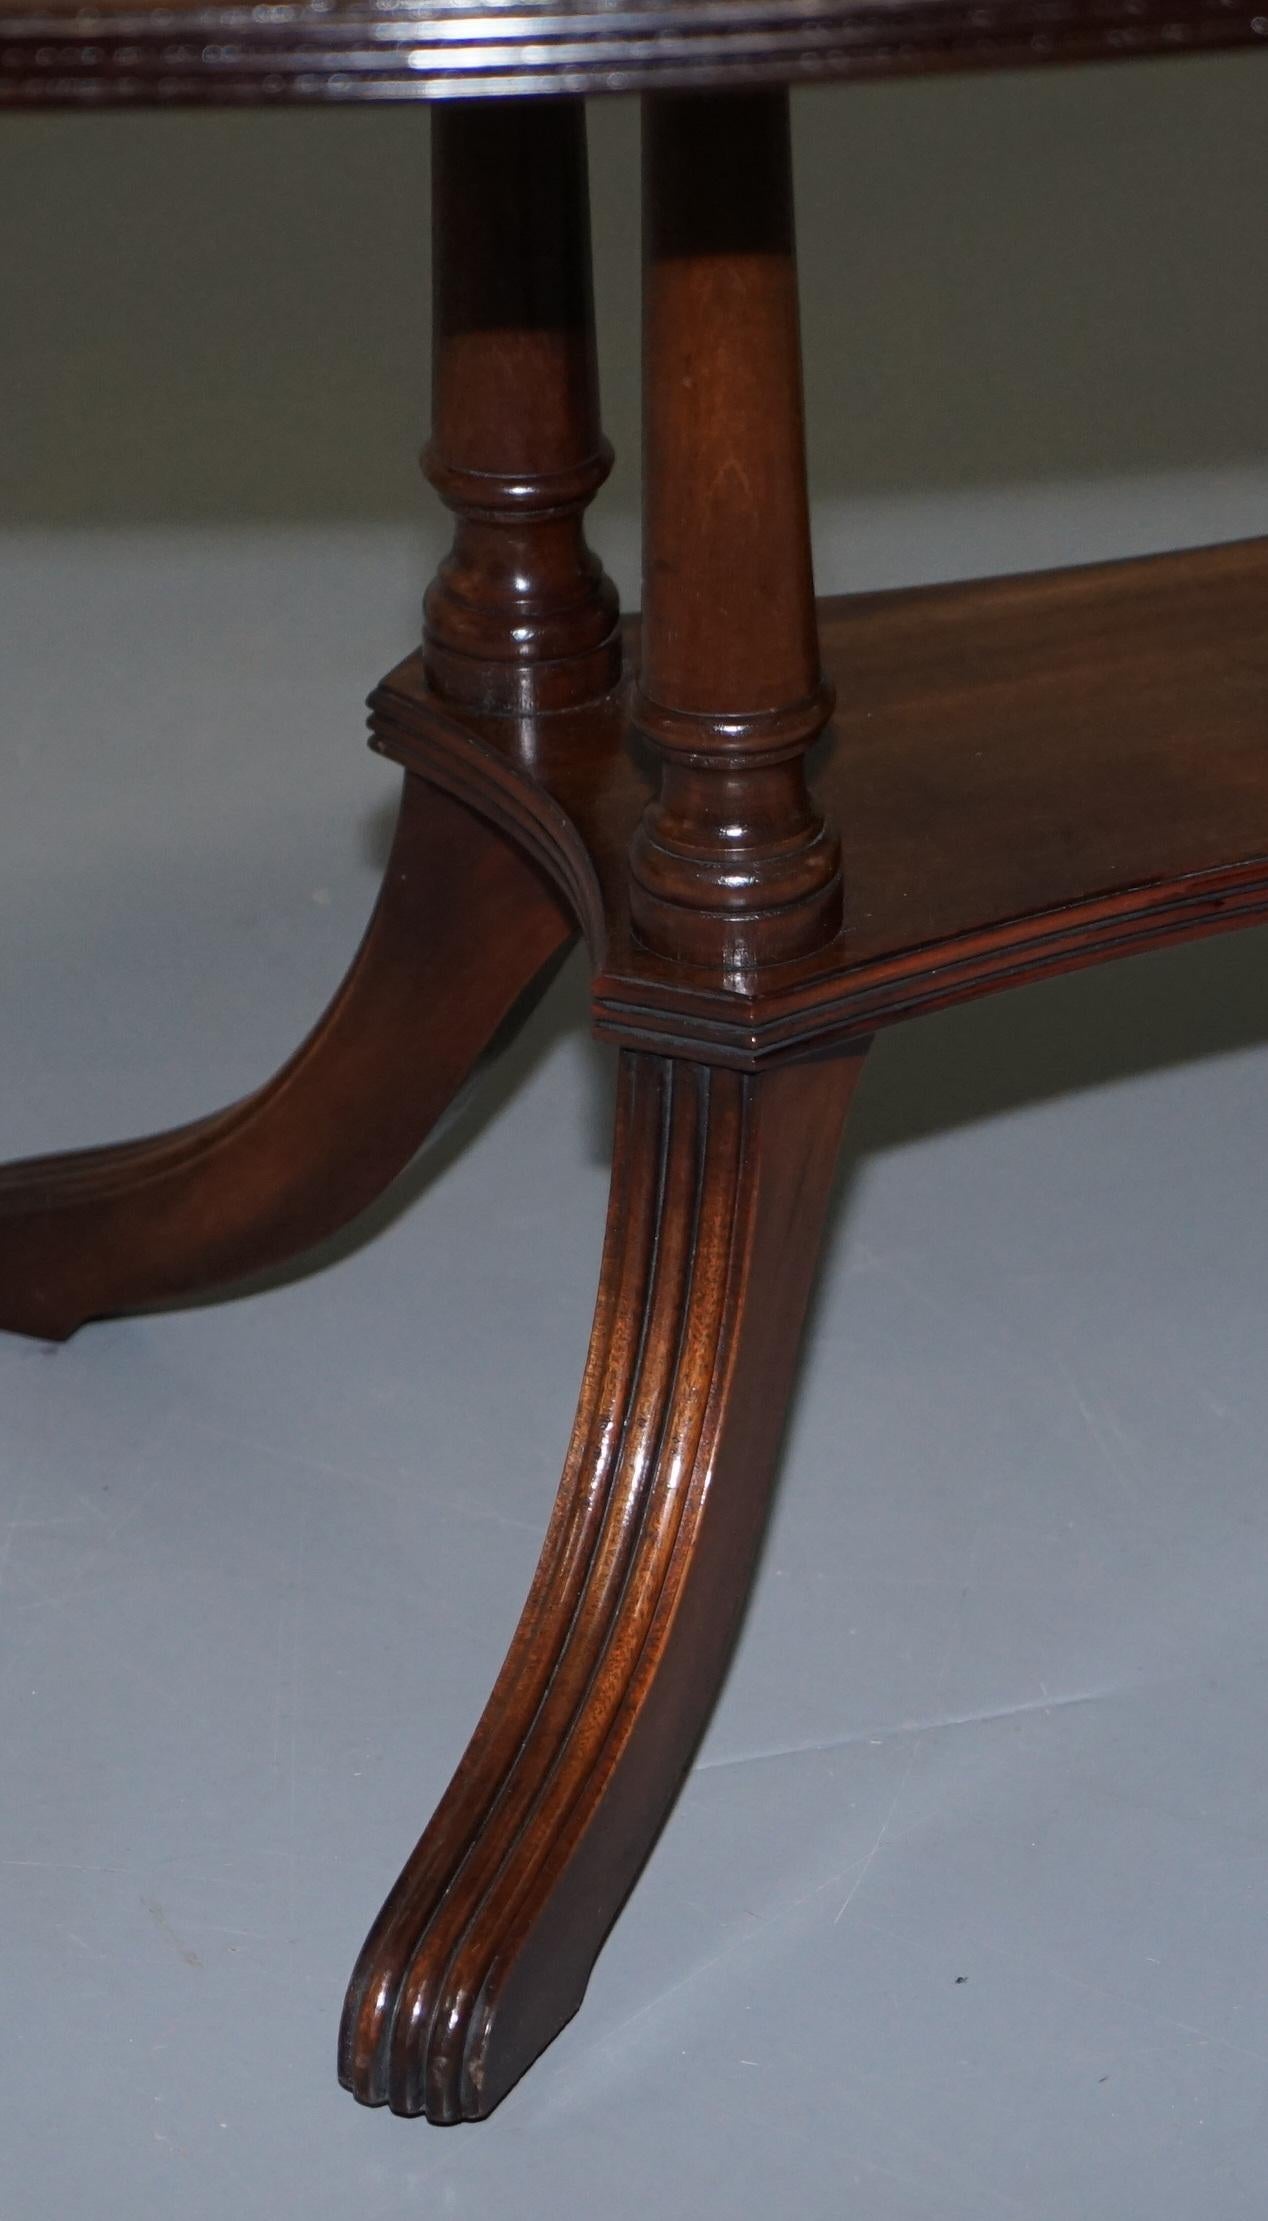 Lovely Pillared Leg Vintage Mahogany Oval Coffee or Cocktail Table Nice Vintage 1